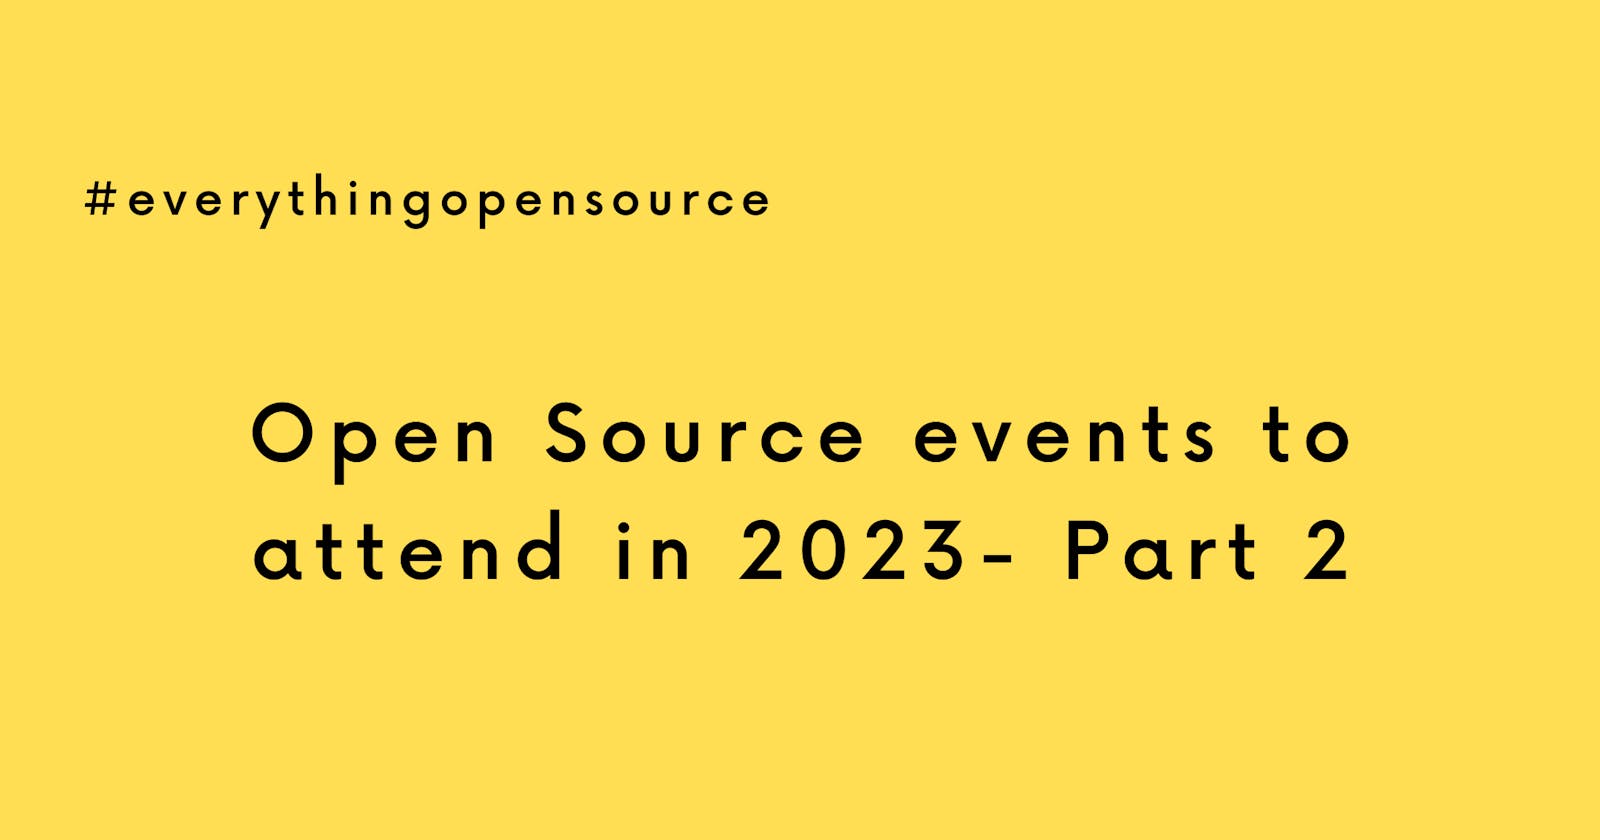 Open Source events to attend in 2023 - Part 2